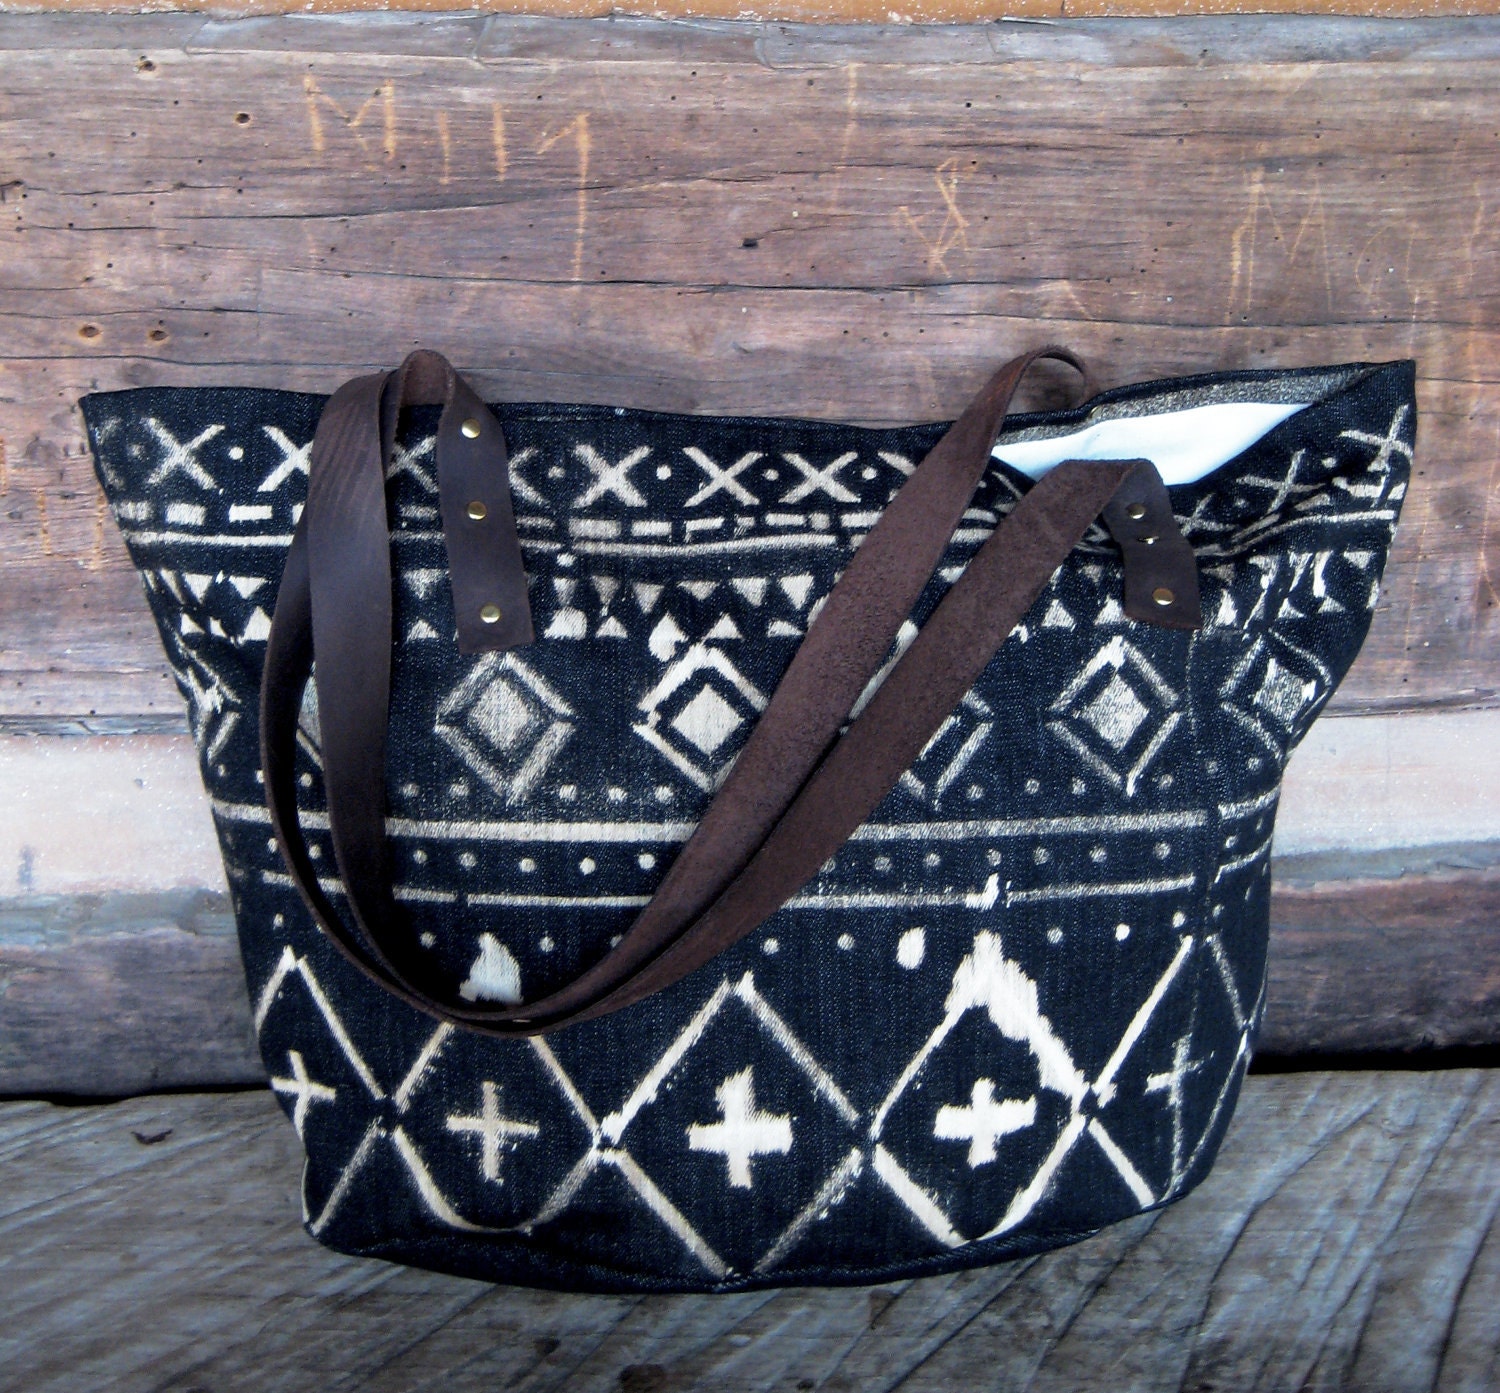 Canvas, Leather, and Denim Market Tote // Beach Bag with Tribal Geometric Print